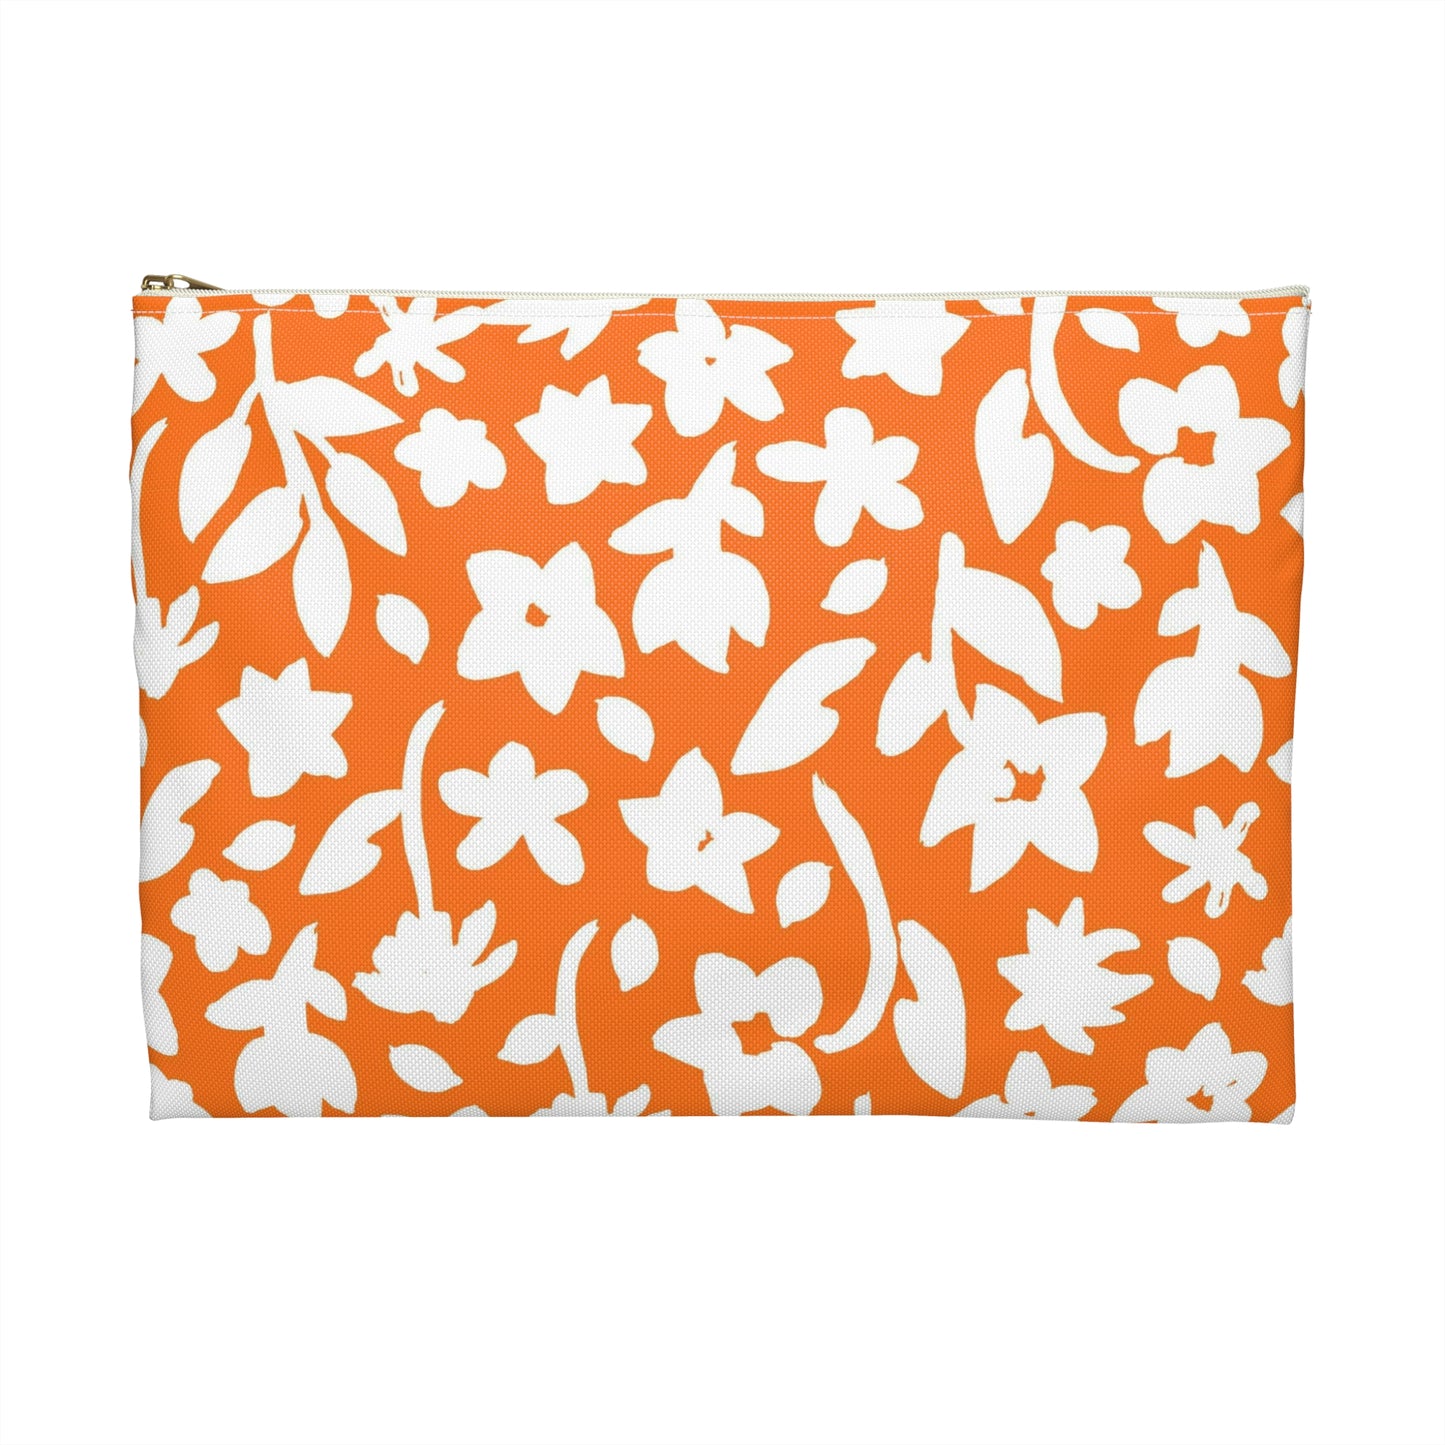 Orange with White Flowers - You are Strong - Inspirational -  Accessory Pouch / Makeup Case / Travel Pouch / Pencil Case / Art Case